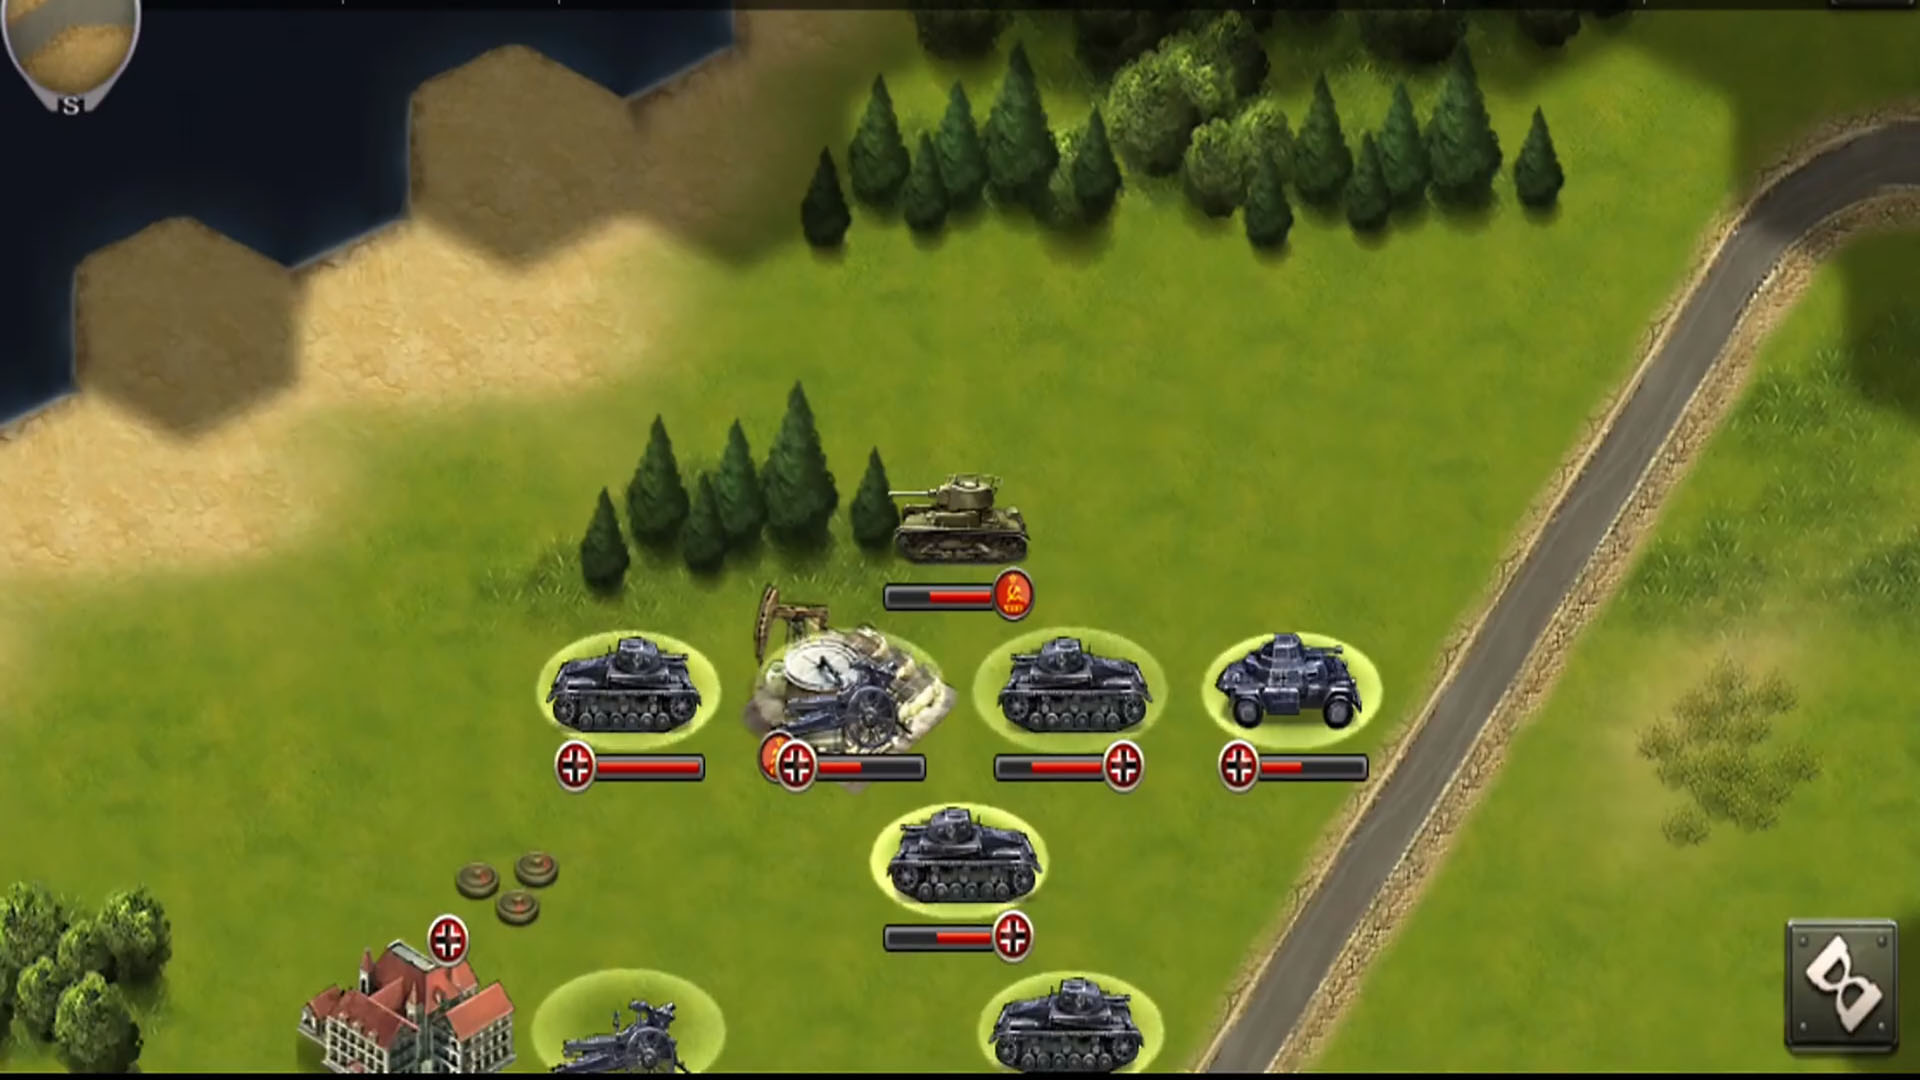 World War 2: Eastern Front 1942 for Android